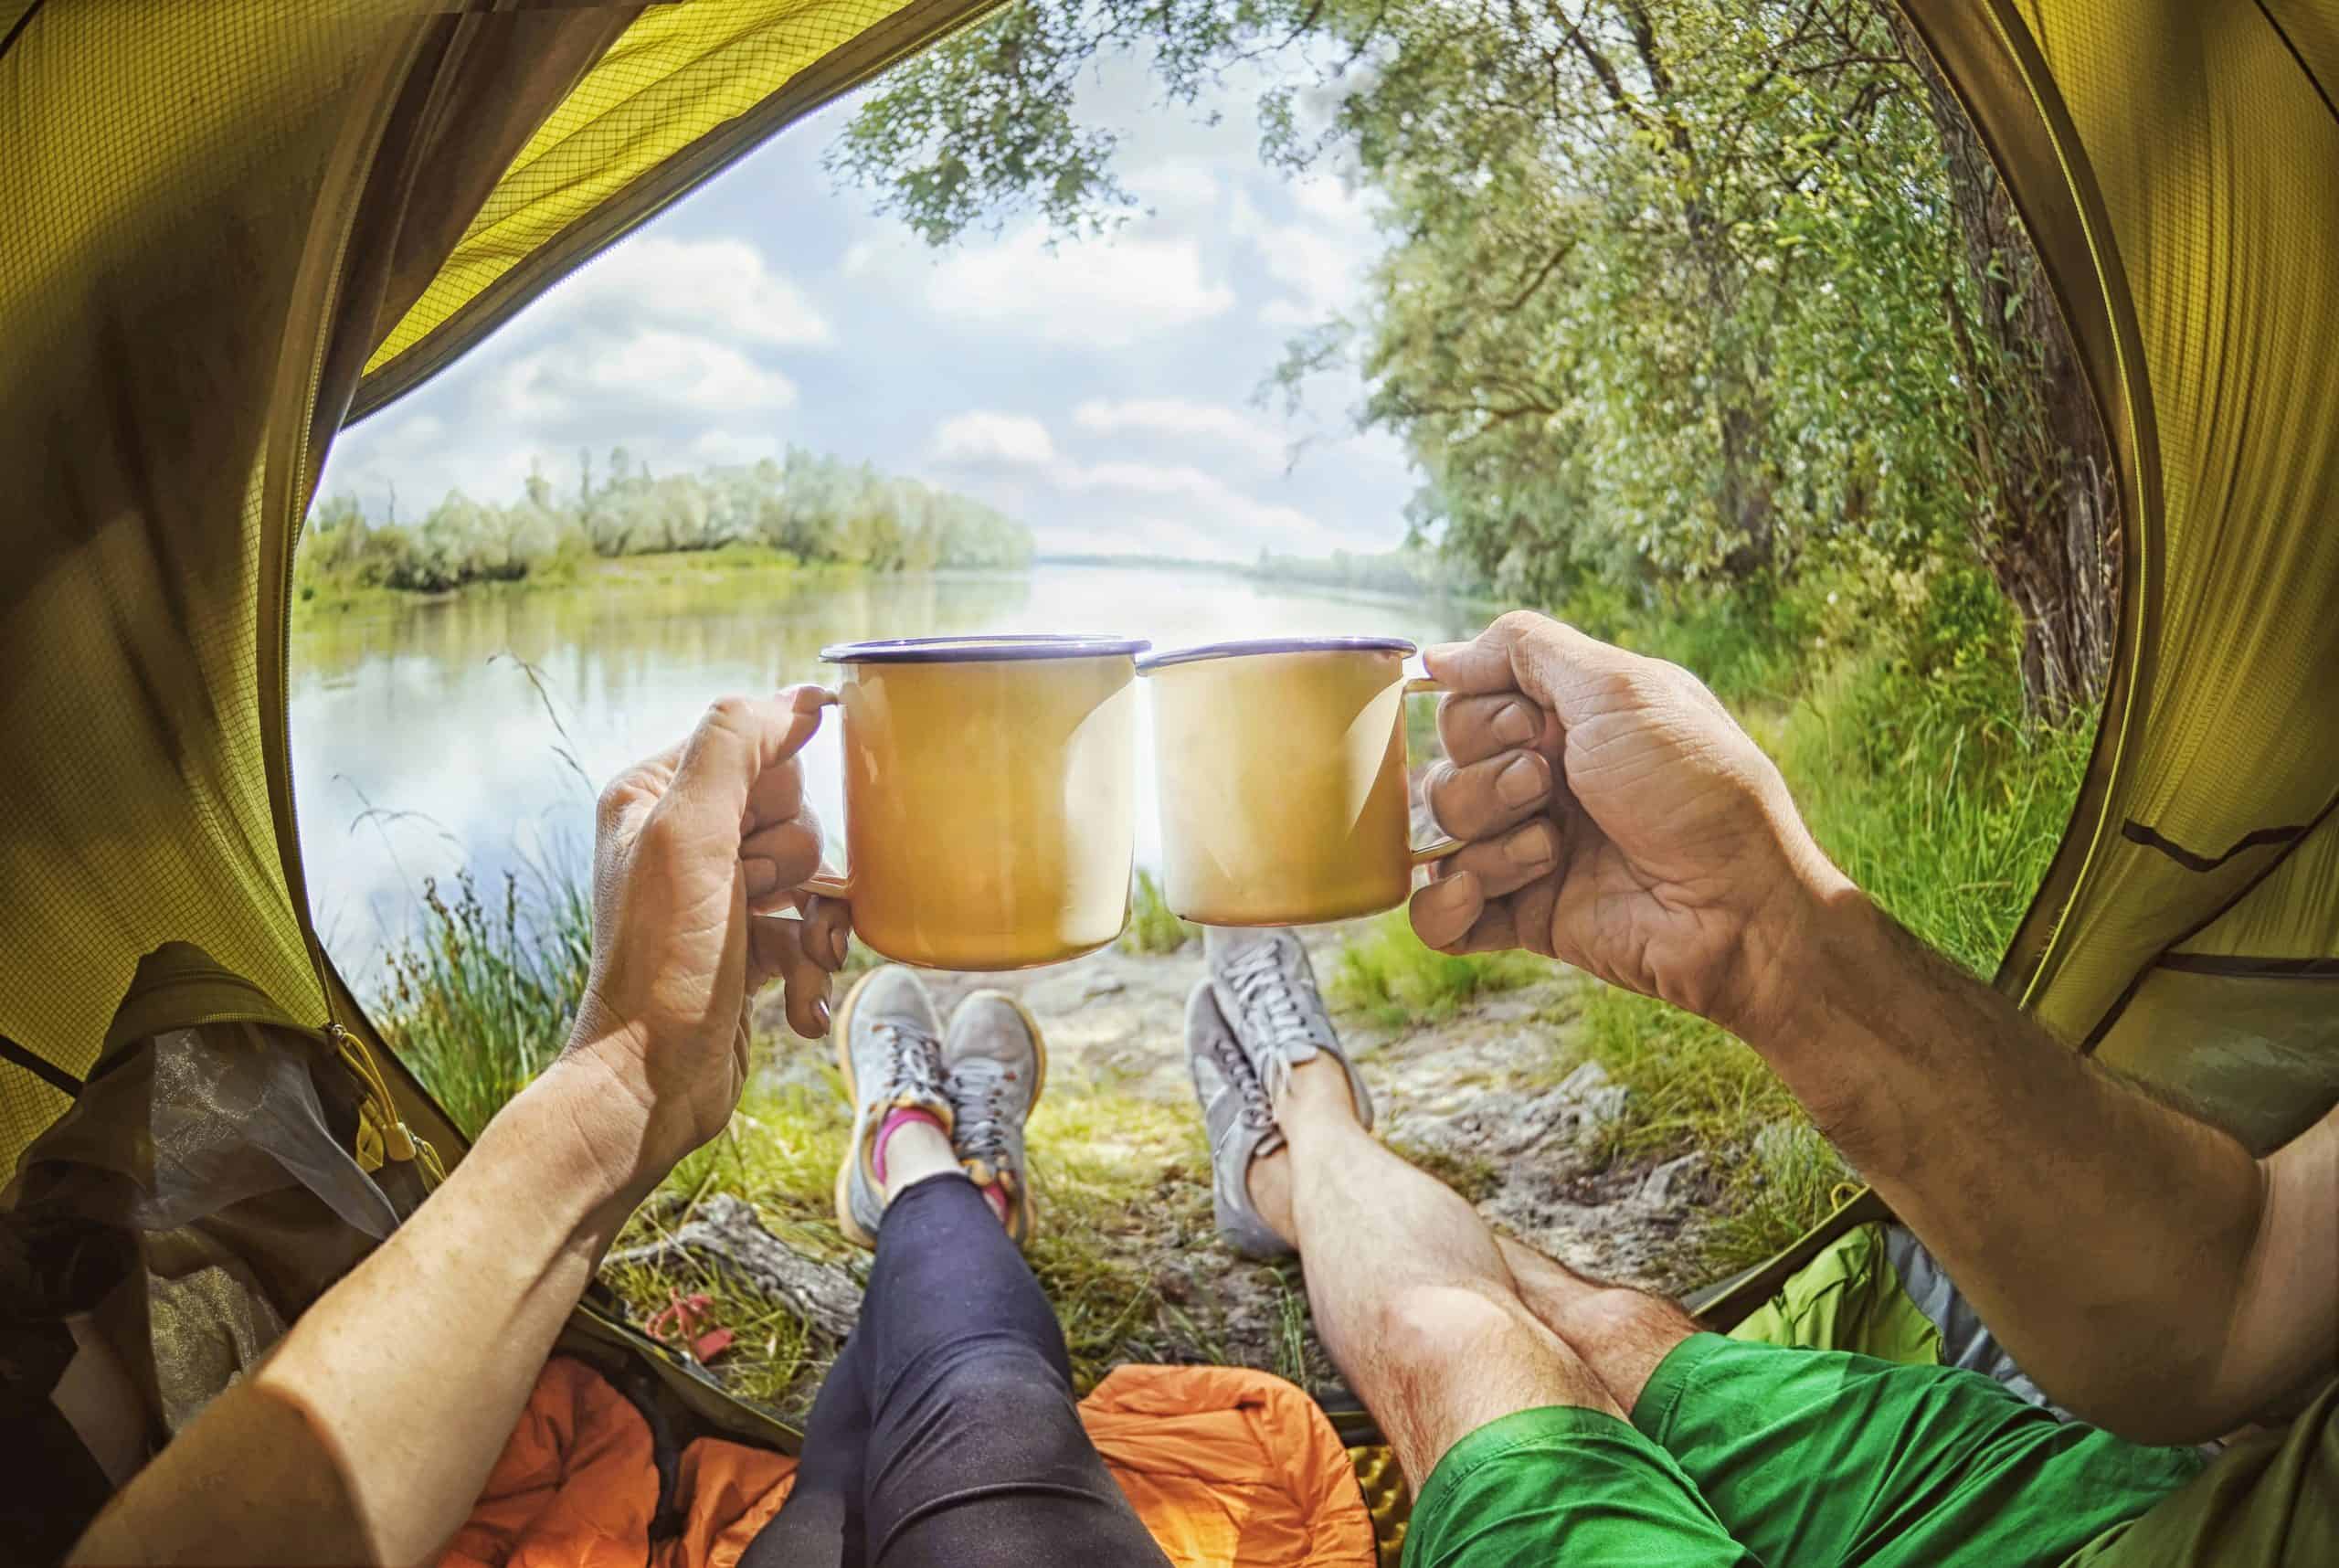 Planning a camping trip? Check out what you should take with you